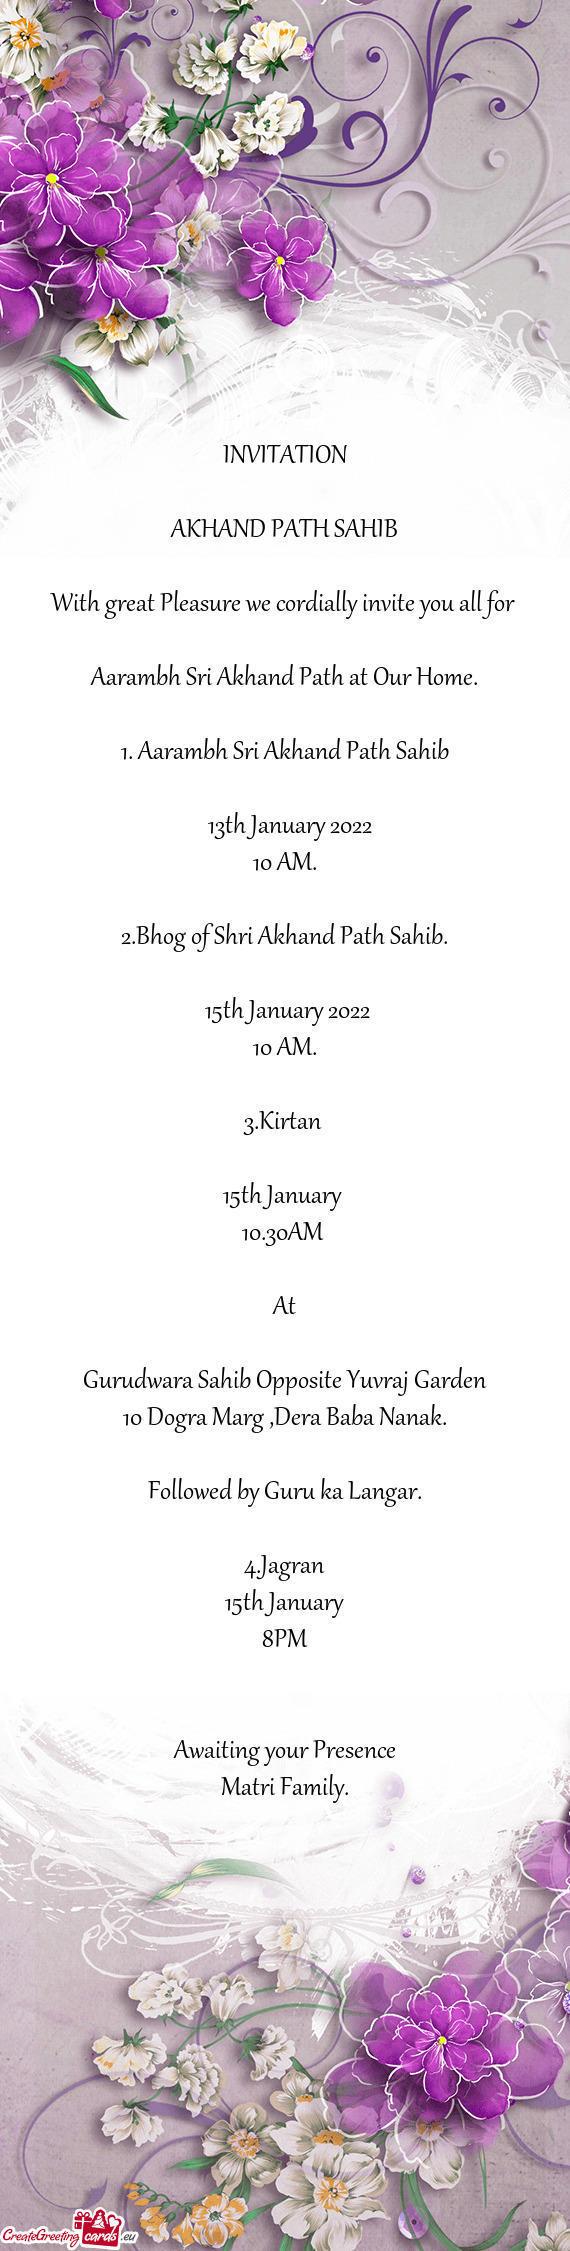 INVITATION
 
 AKHAND PATH SAHIB
 
 With great Pleasure we cordially invite you all for 
 
 Aarambh